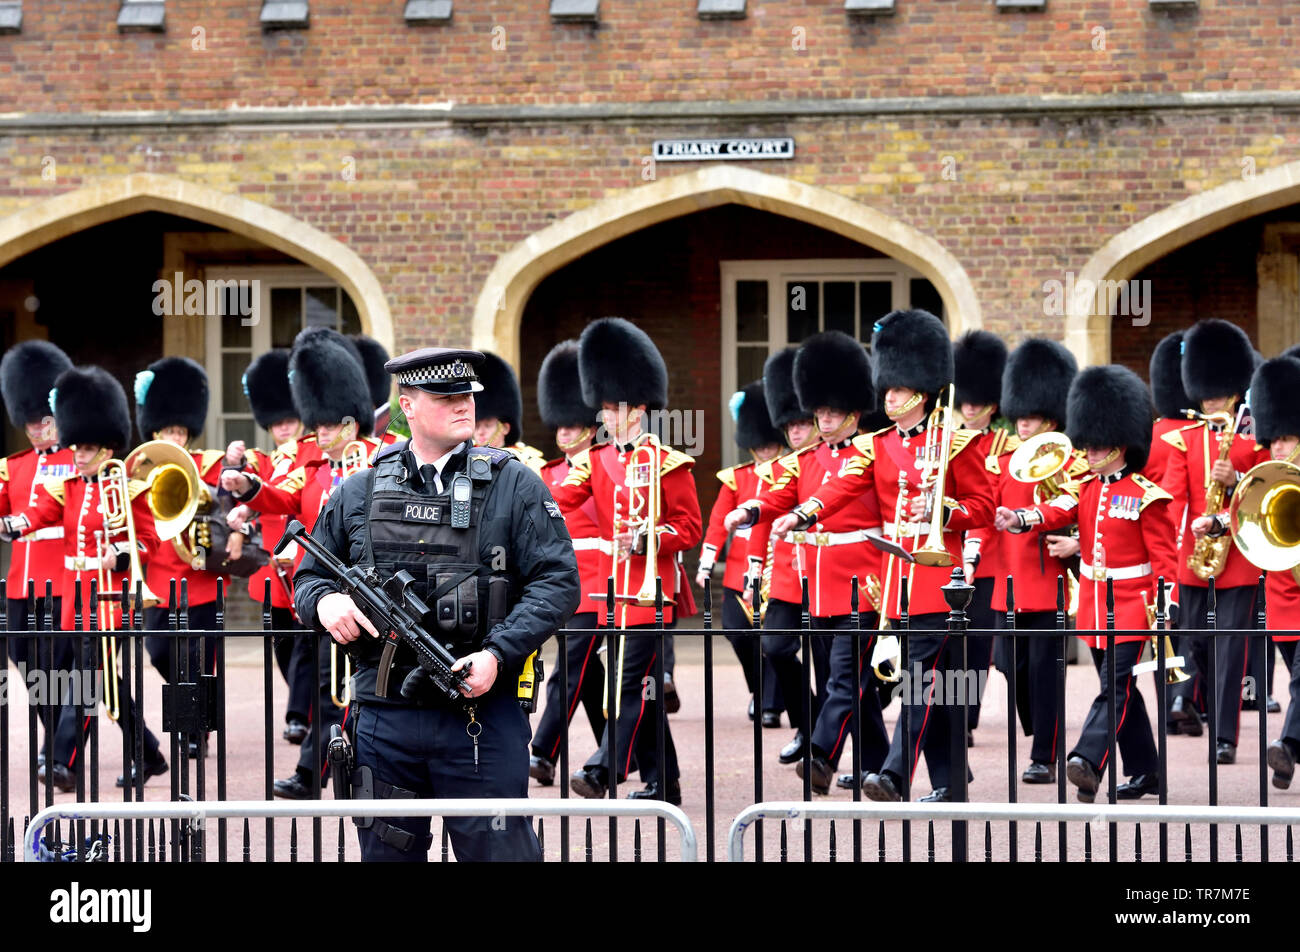 London, England, UK. Armed police officer on duty at Friary Court, St James's Palace during the Changing of the Guard Stock Photo